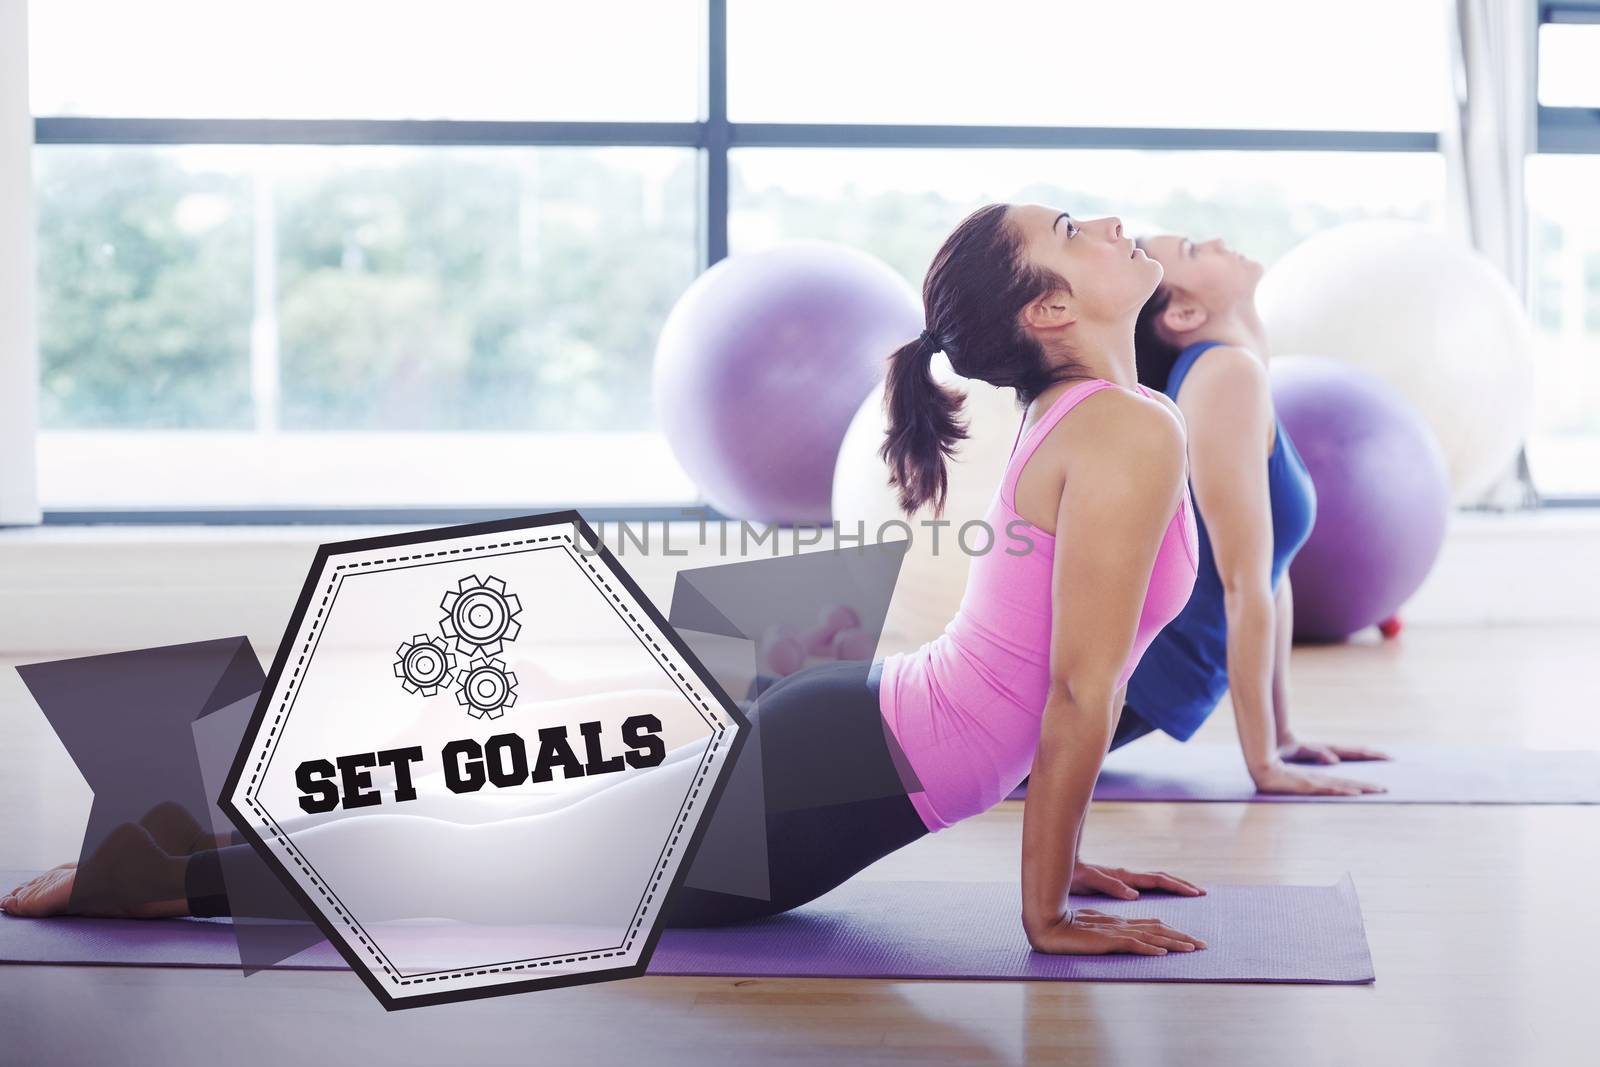 The word set goals and fit women doing the cobra pose in fitness studio against hexagon